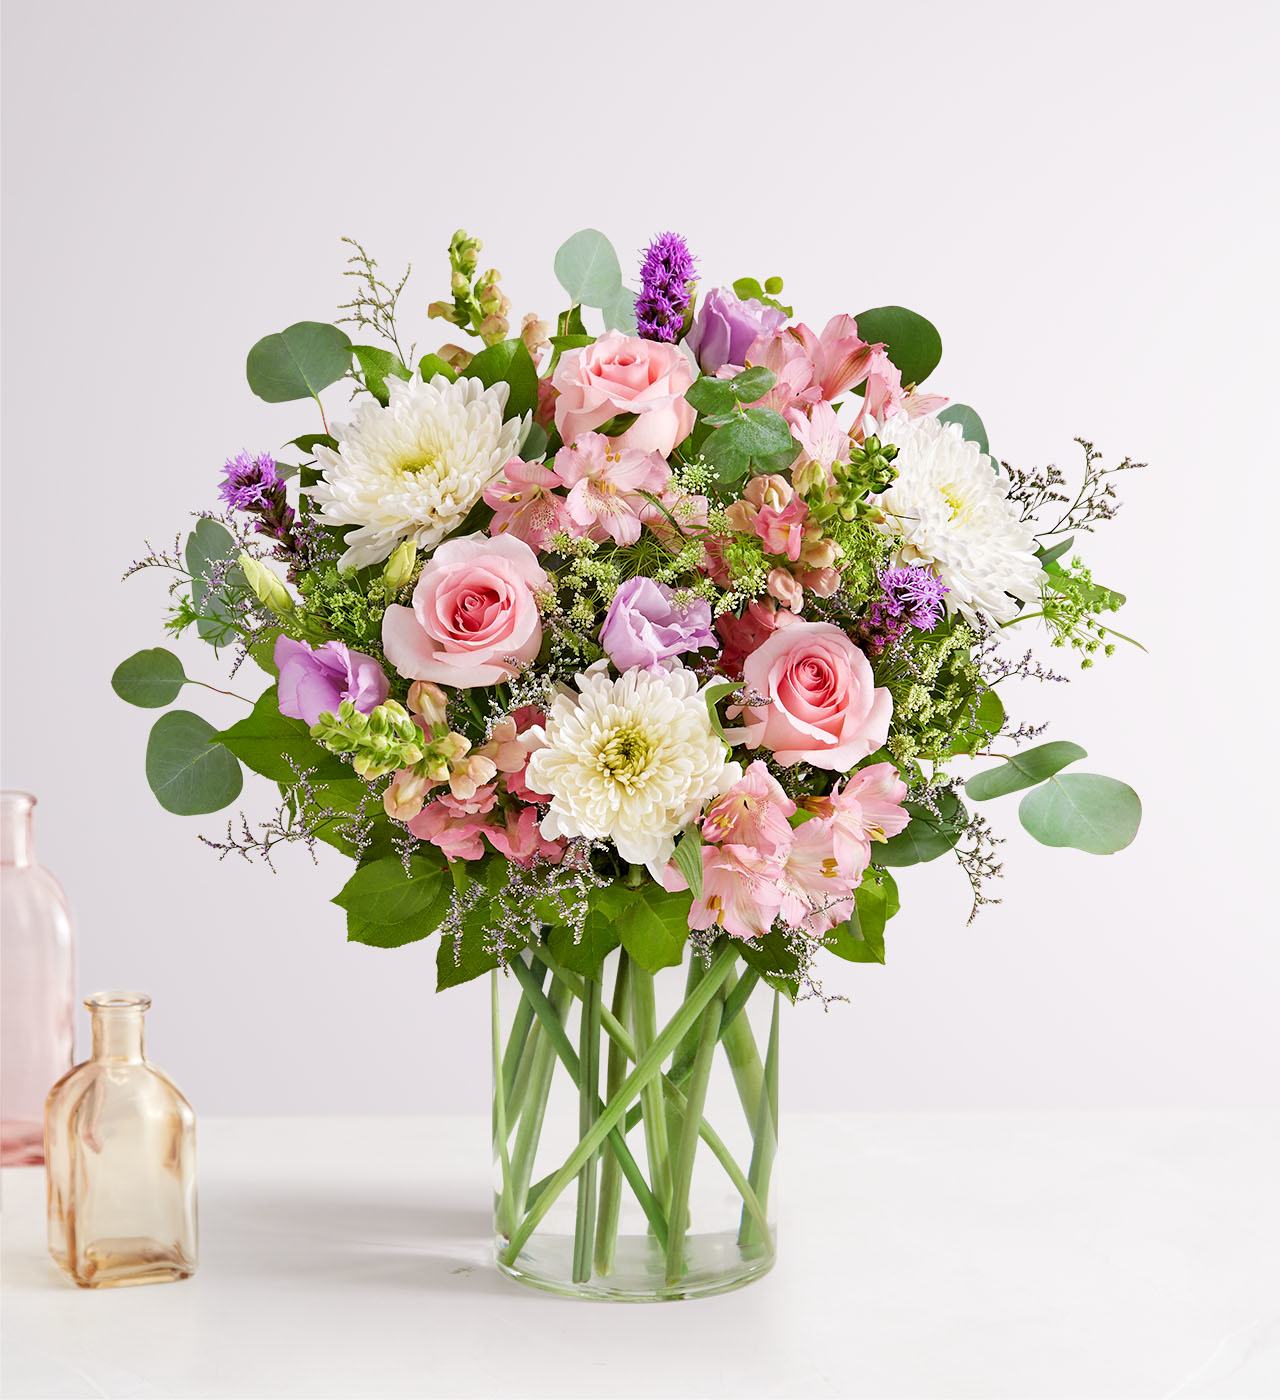 Floral Meadow for Mom - Clear glass vase filled with pink roses, lisianthus, pink spray roses, pink snap dragons, purple liatris, pink alstroemeria, baby's breath, limonium, and mixed greens. 